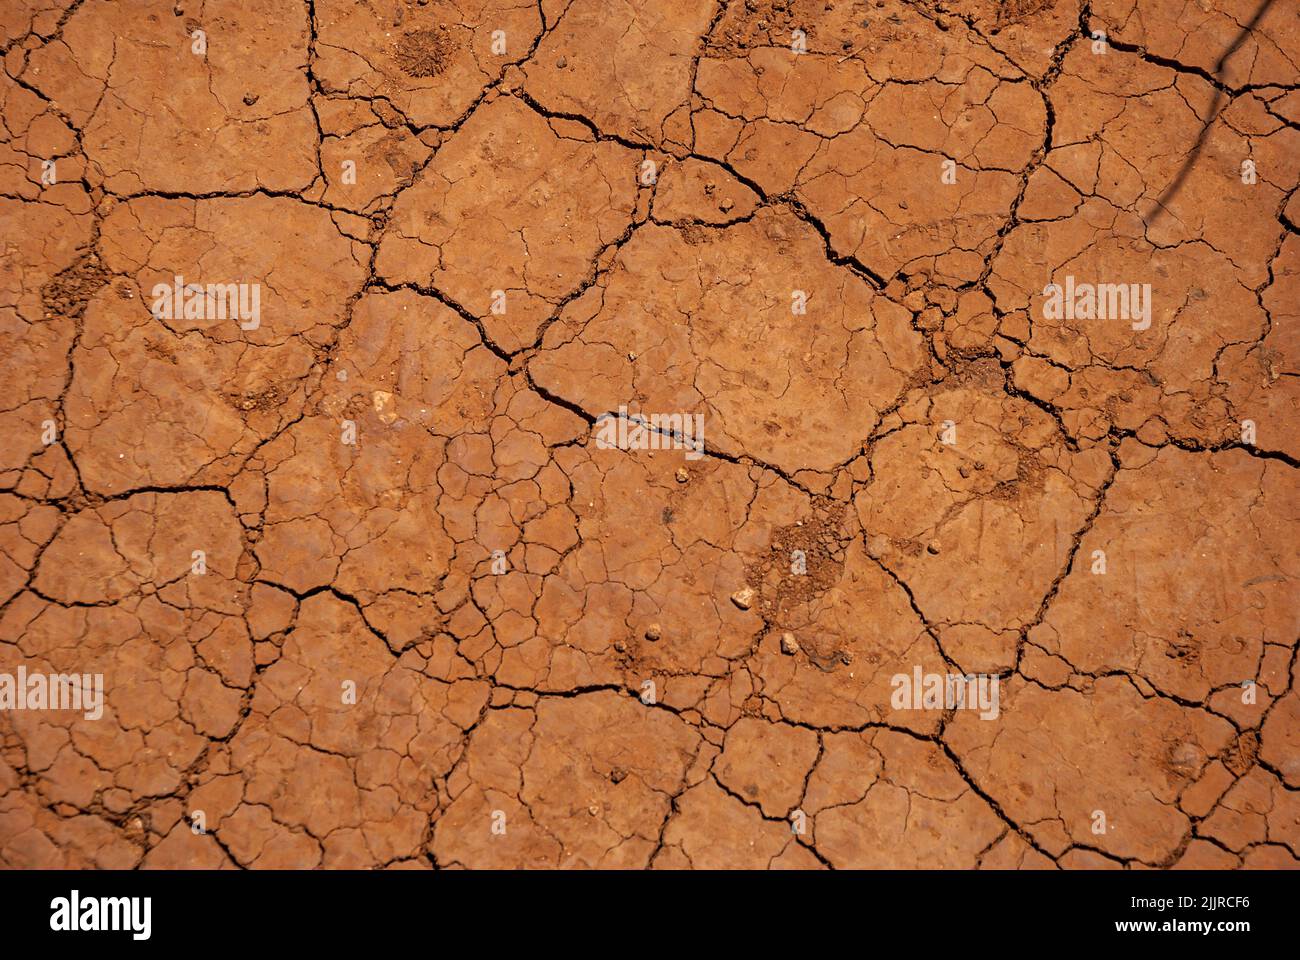 A closeup of cracked dry earth texture Stock Photo